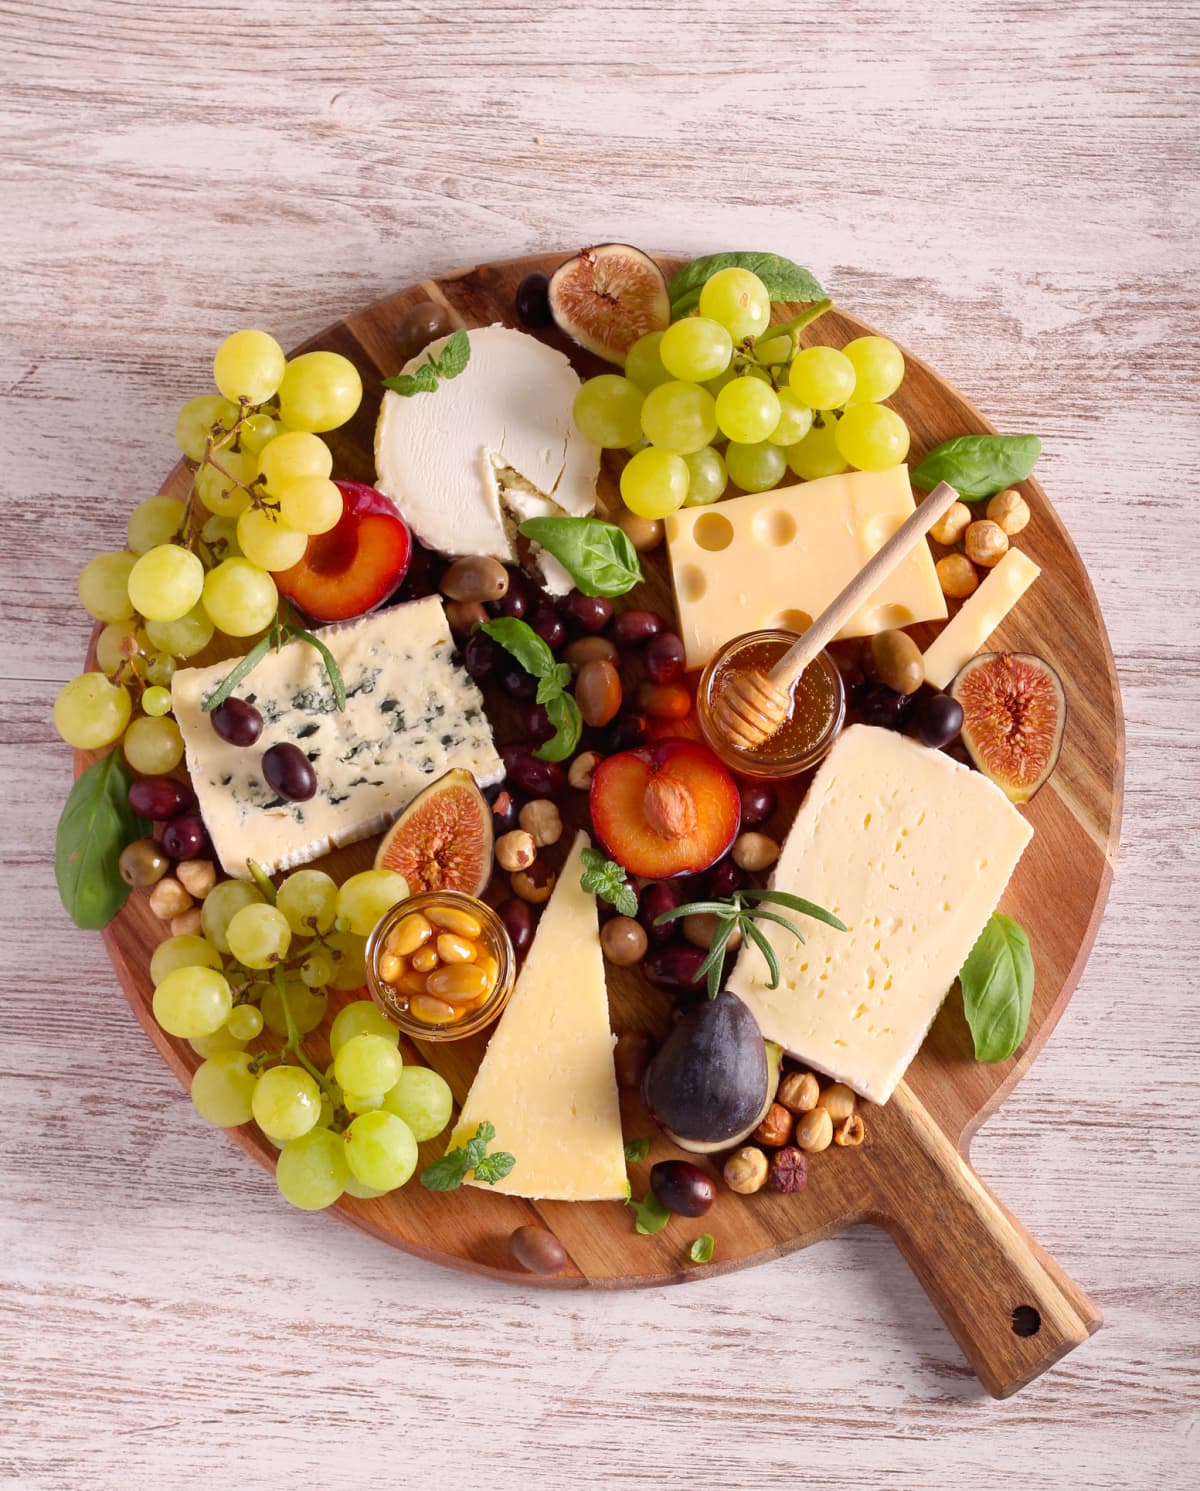 Cheese plate served with red wine, olives, grapes, jam and bread snacks on dark wooden background. Top view.